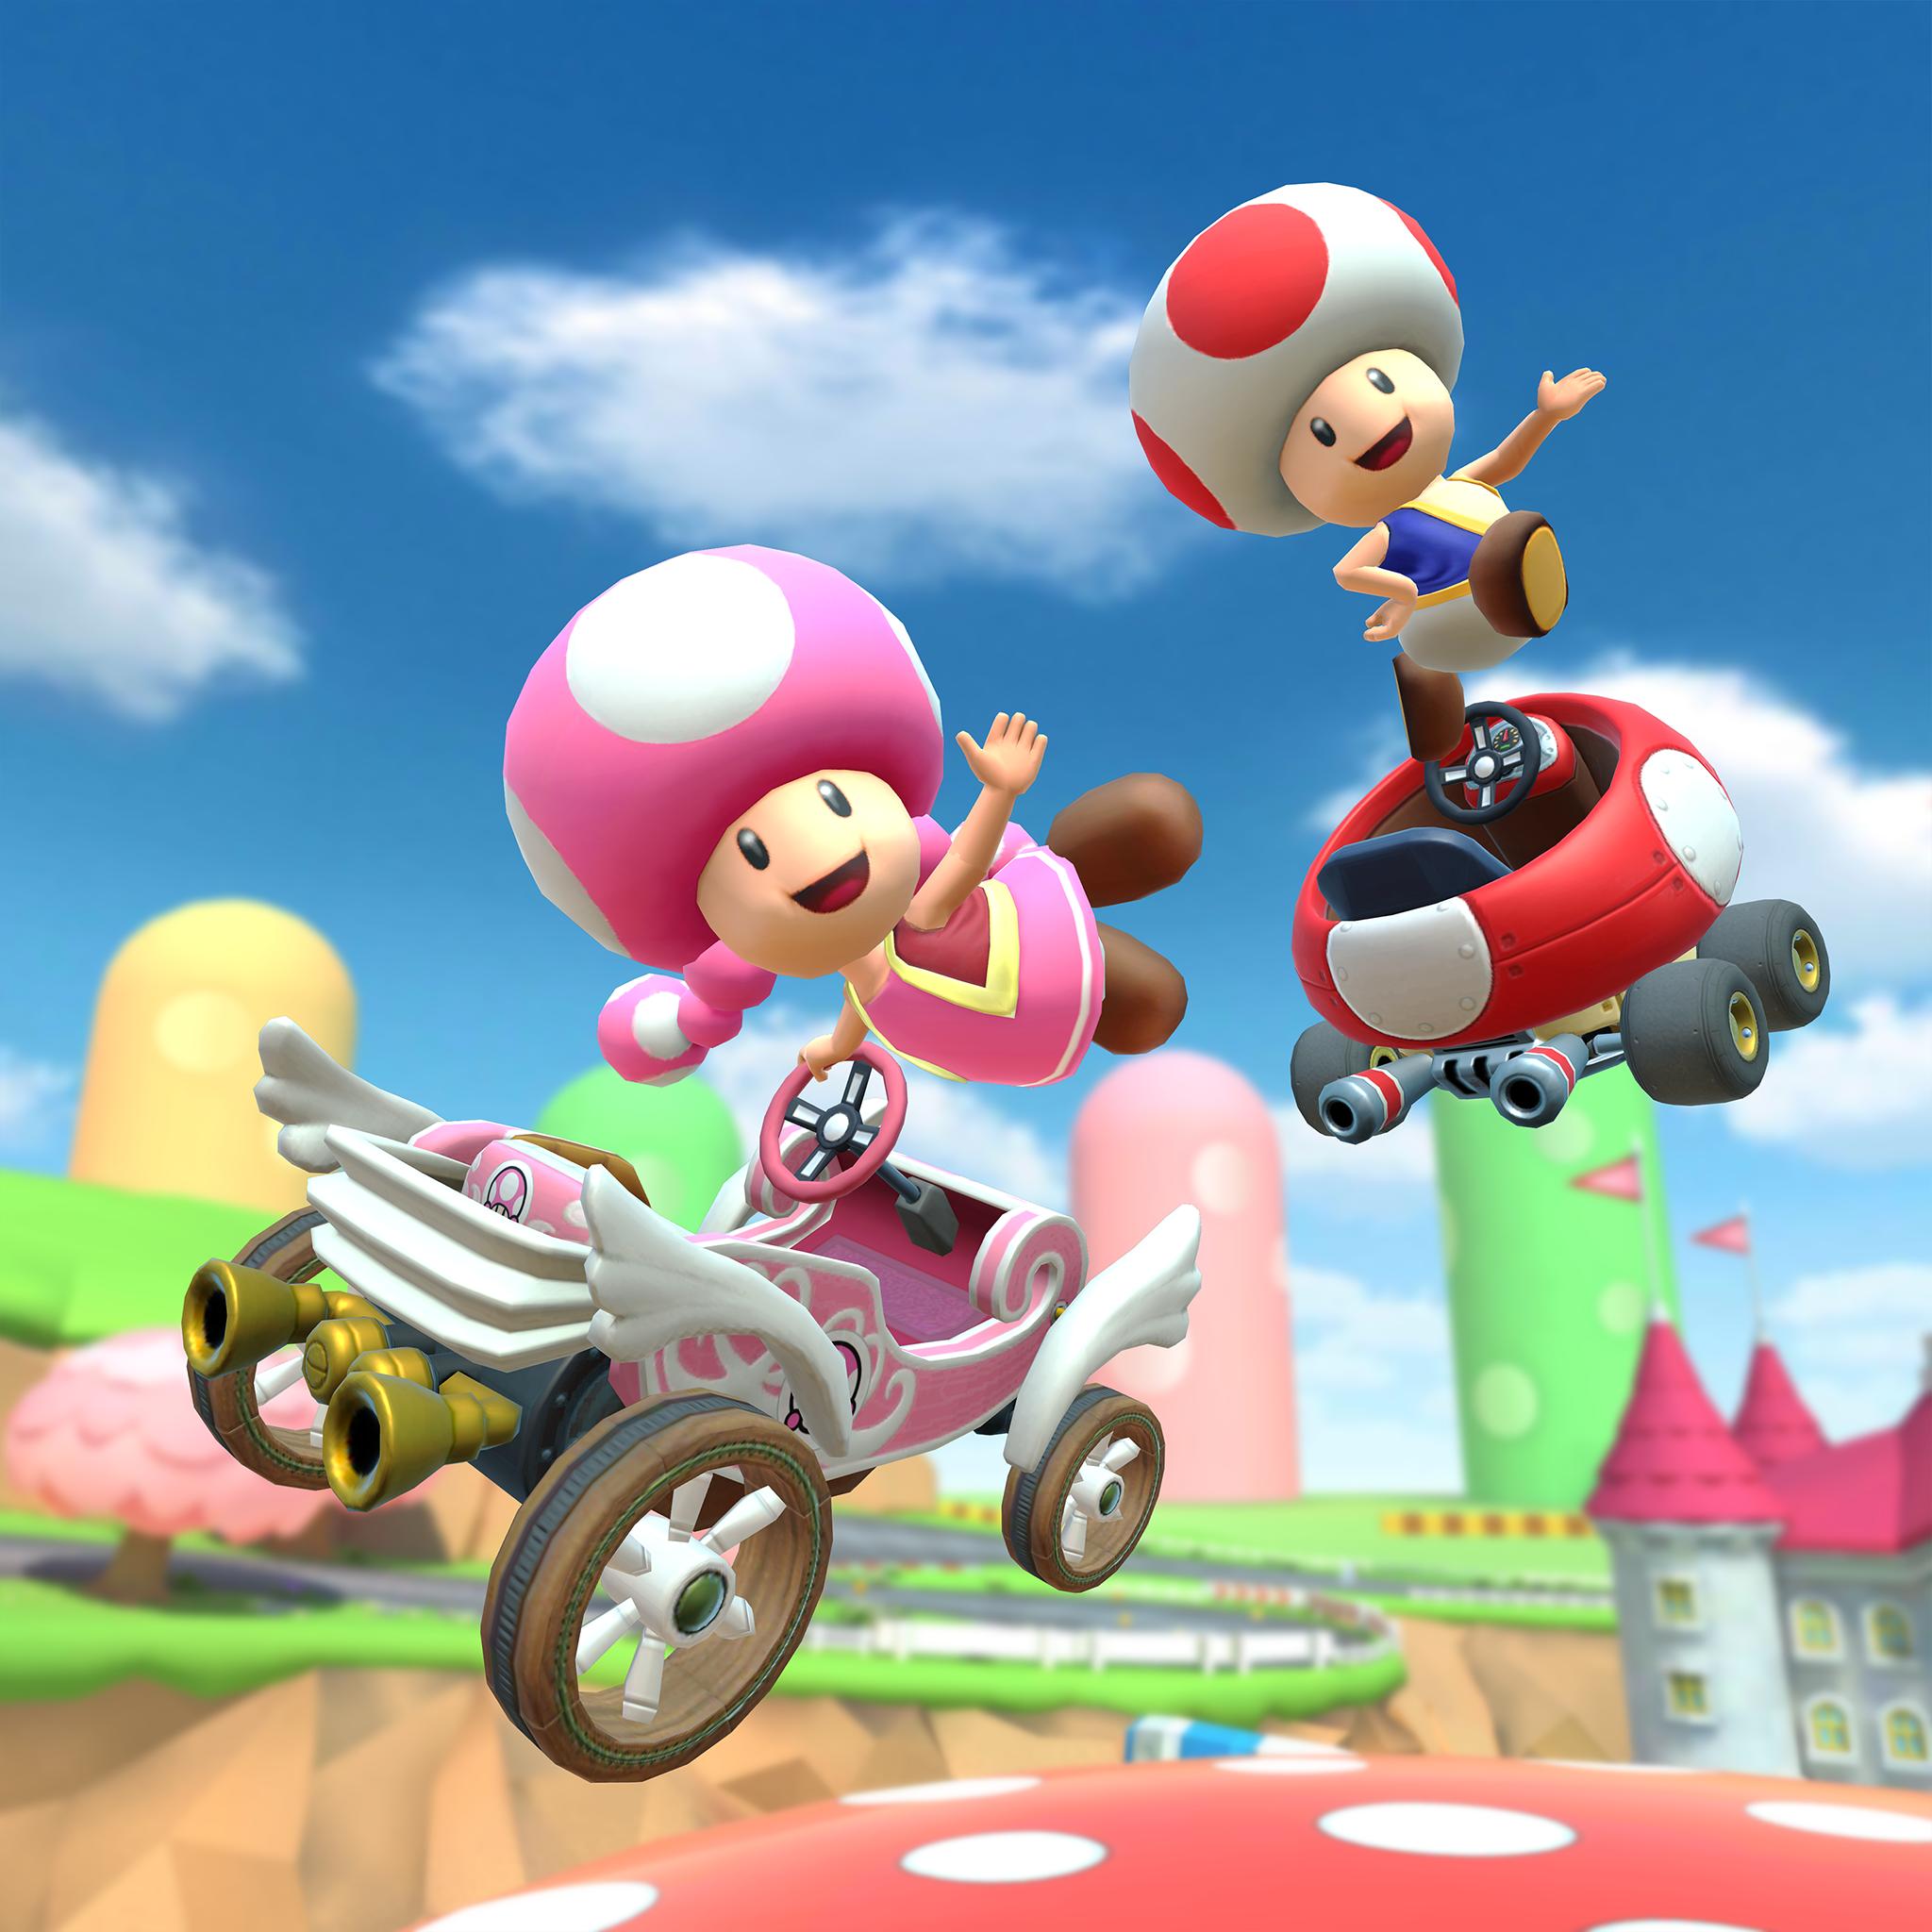 The course, New York Minute, makes its debut in Mario Kart Tour! 